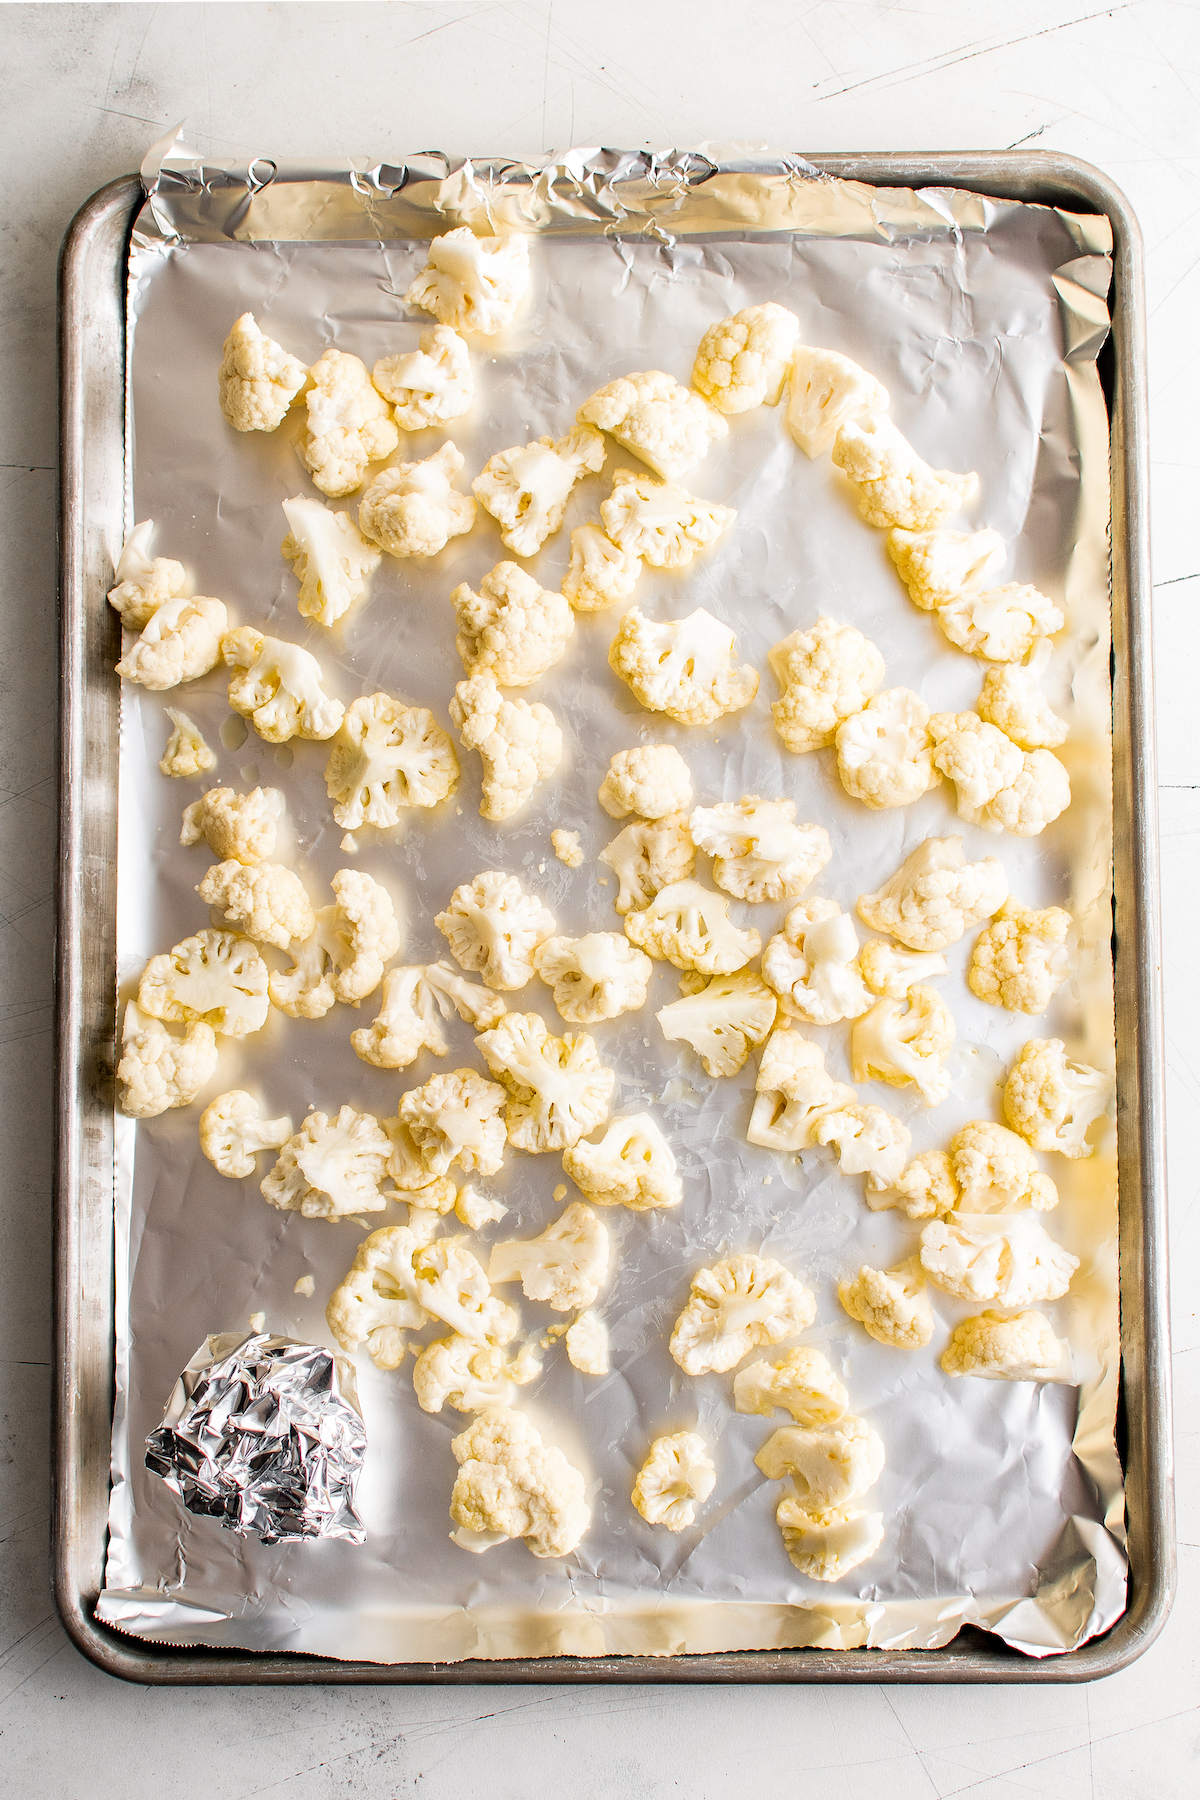 Cauliflower florets and a foil-covered head of garlic on a sheet pan.